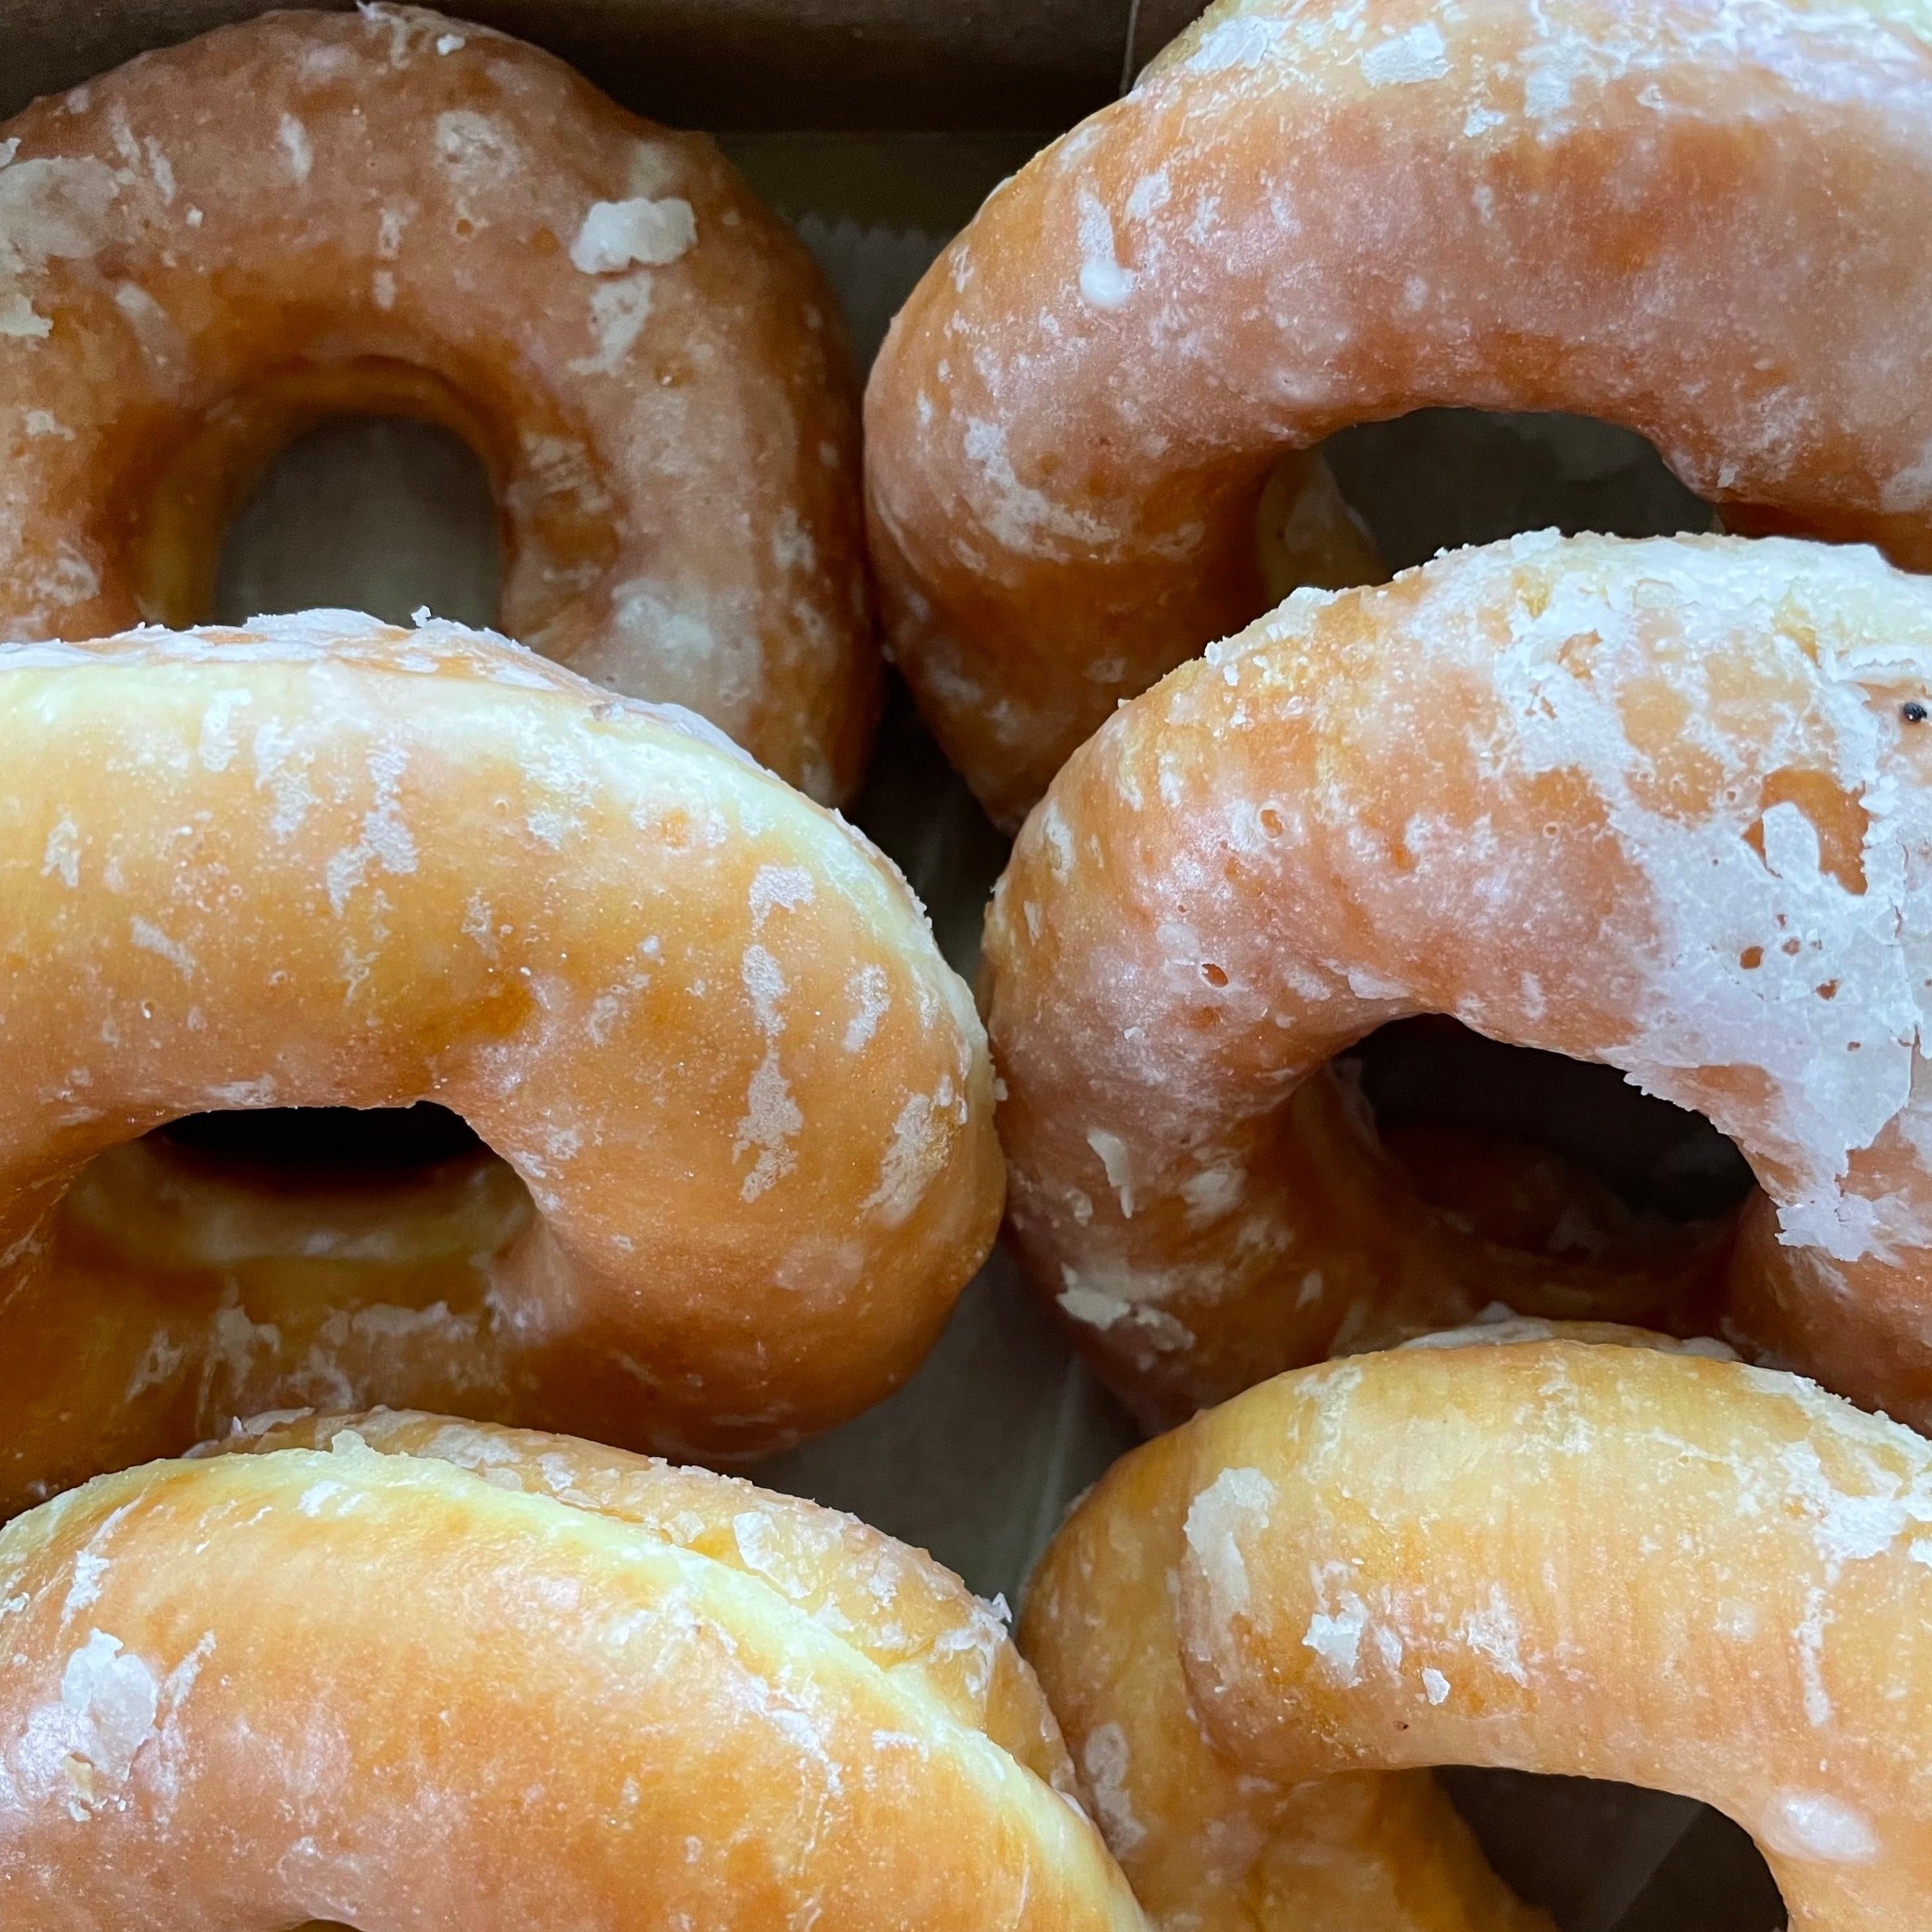 Donut Den: Glazed - $12.60 - The Local Y'all